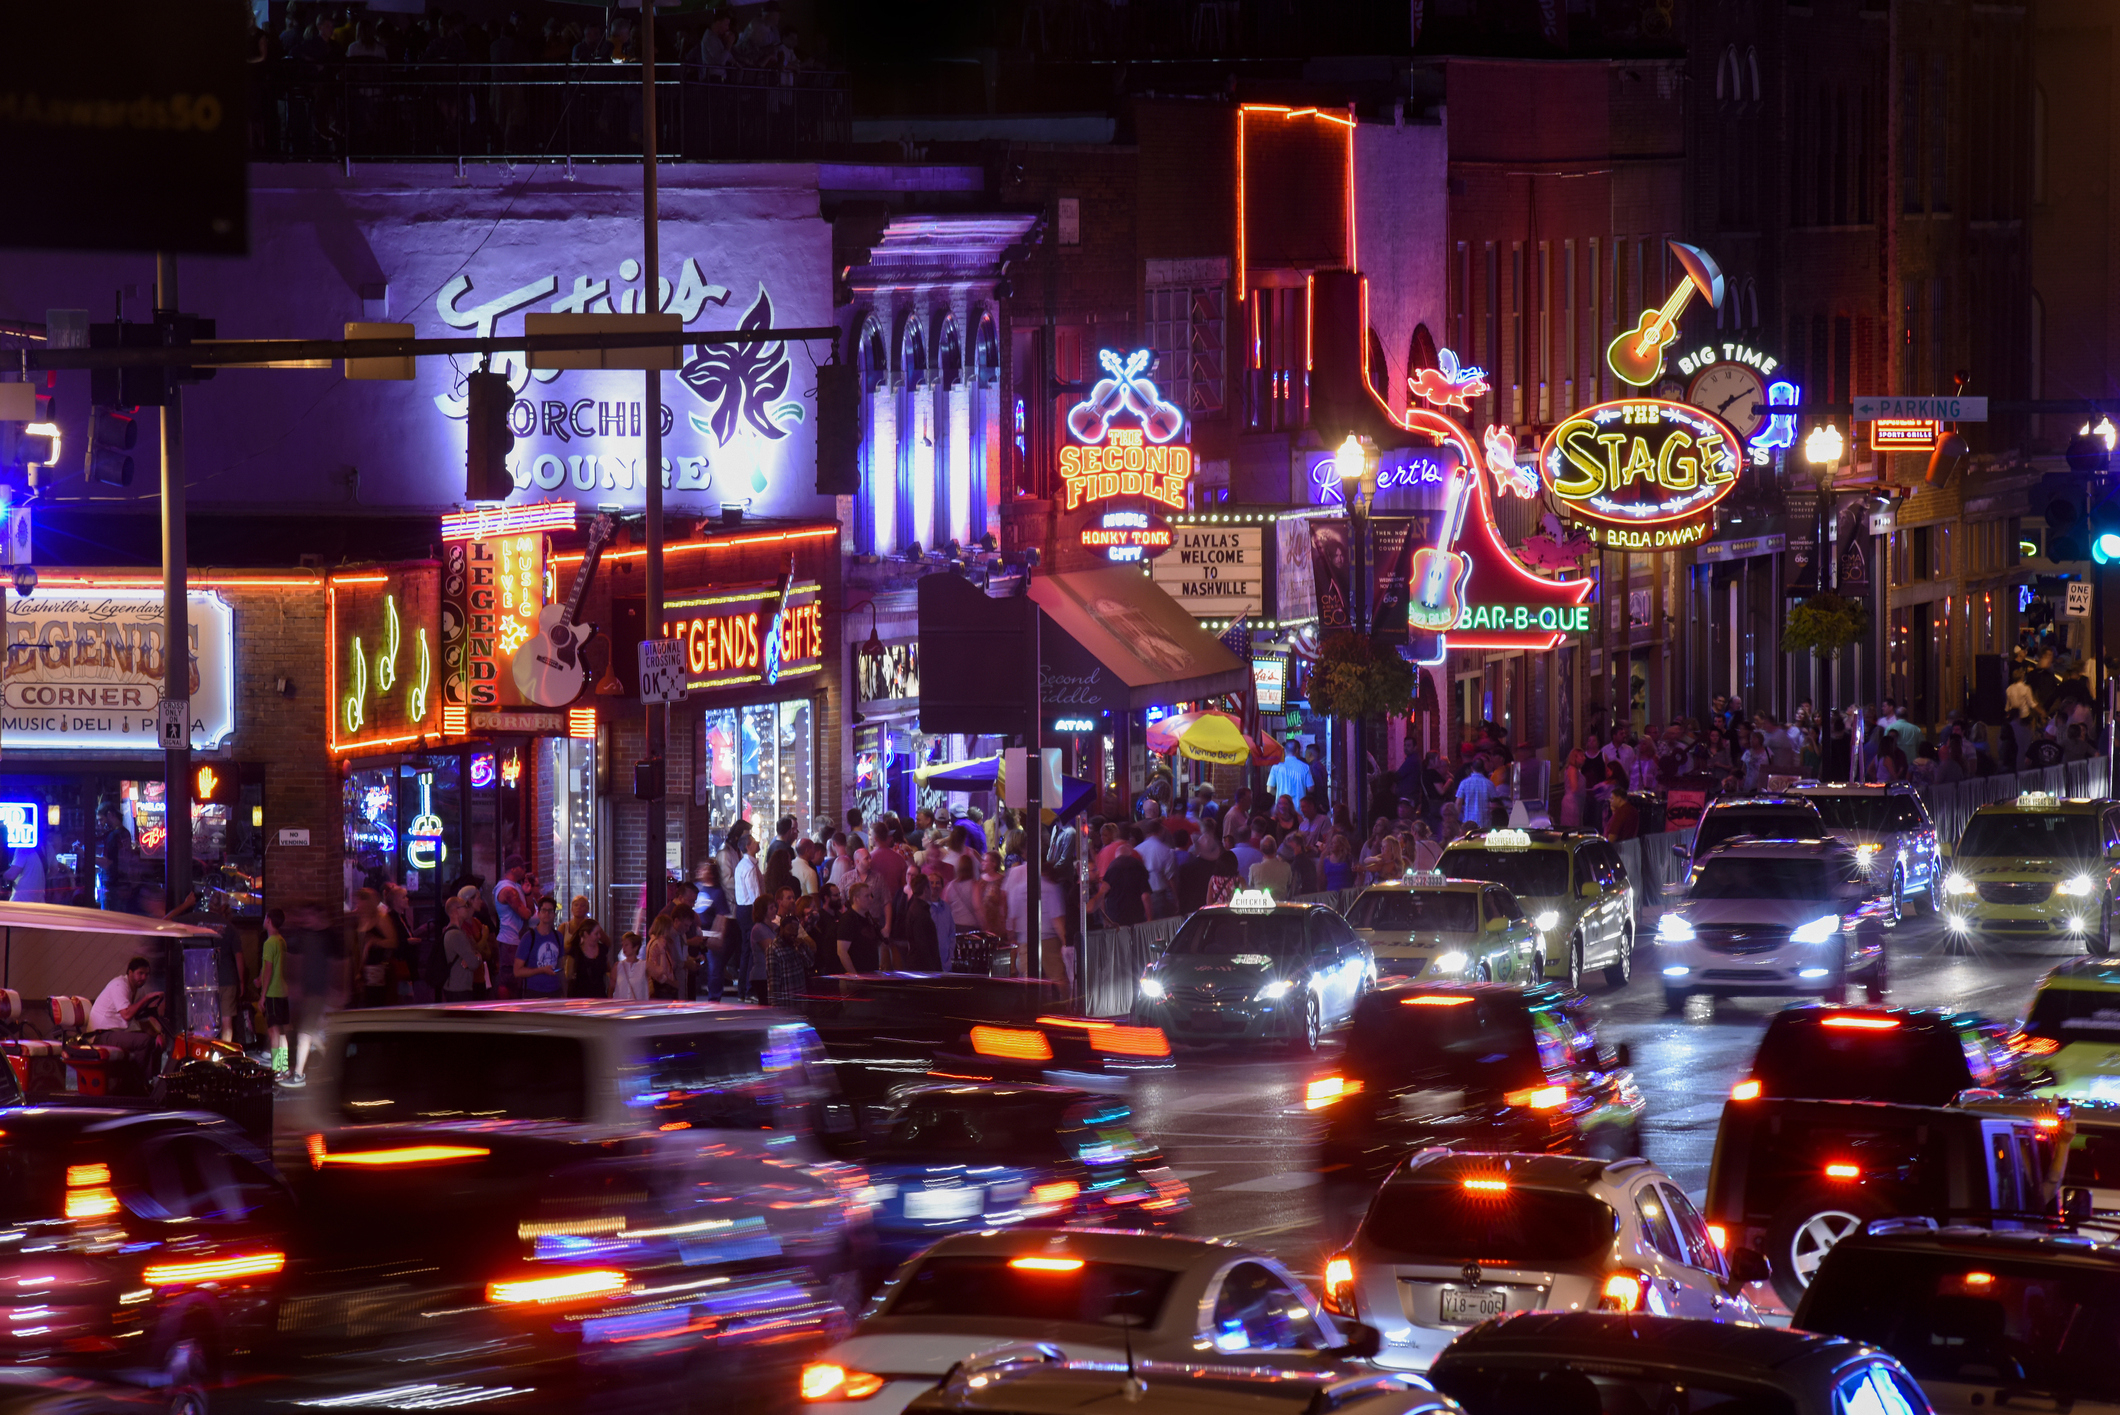 A busy street at night with neon signs and crowds in Nashville